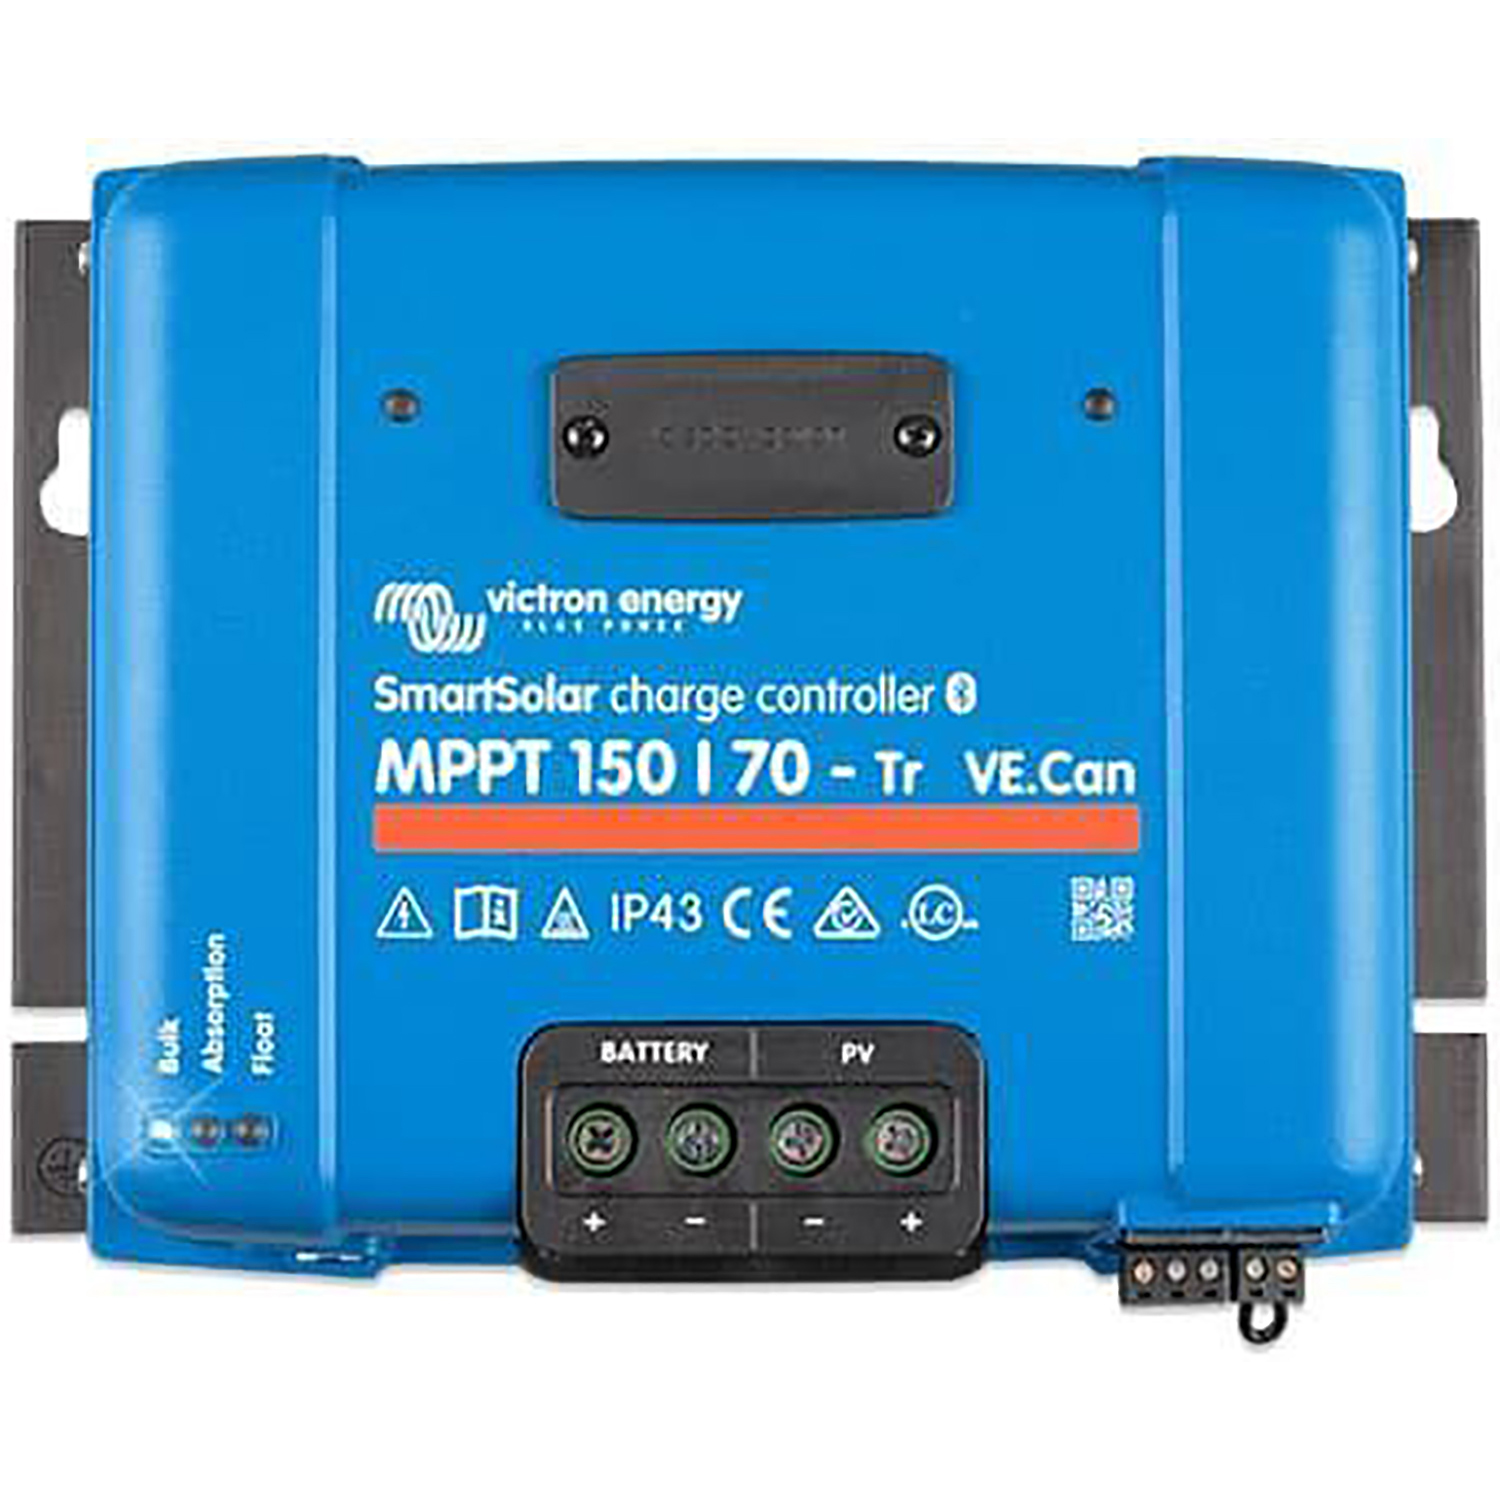 Victron MPPT Solar Charge Controllers Explained — Intelligent Controls